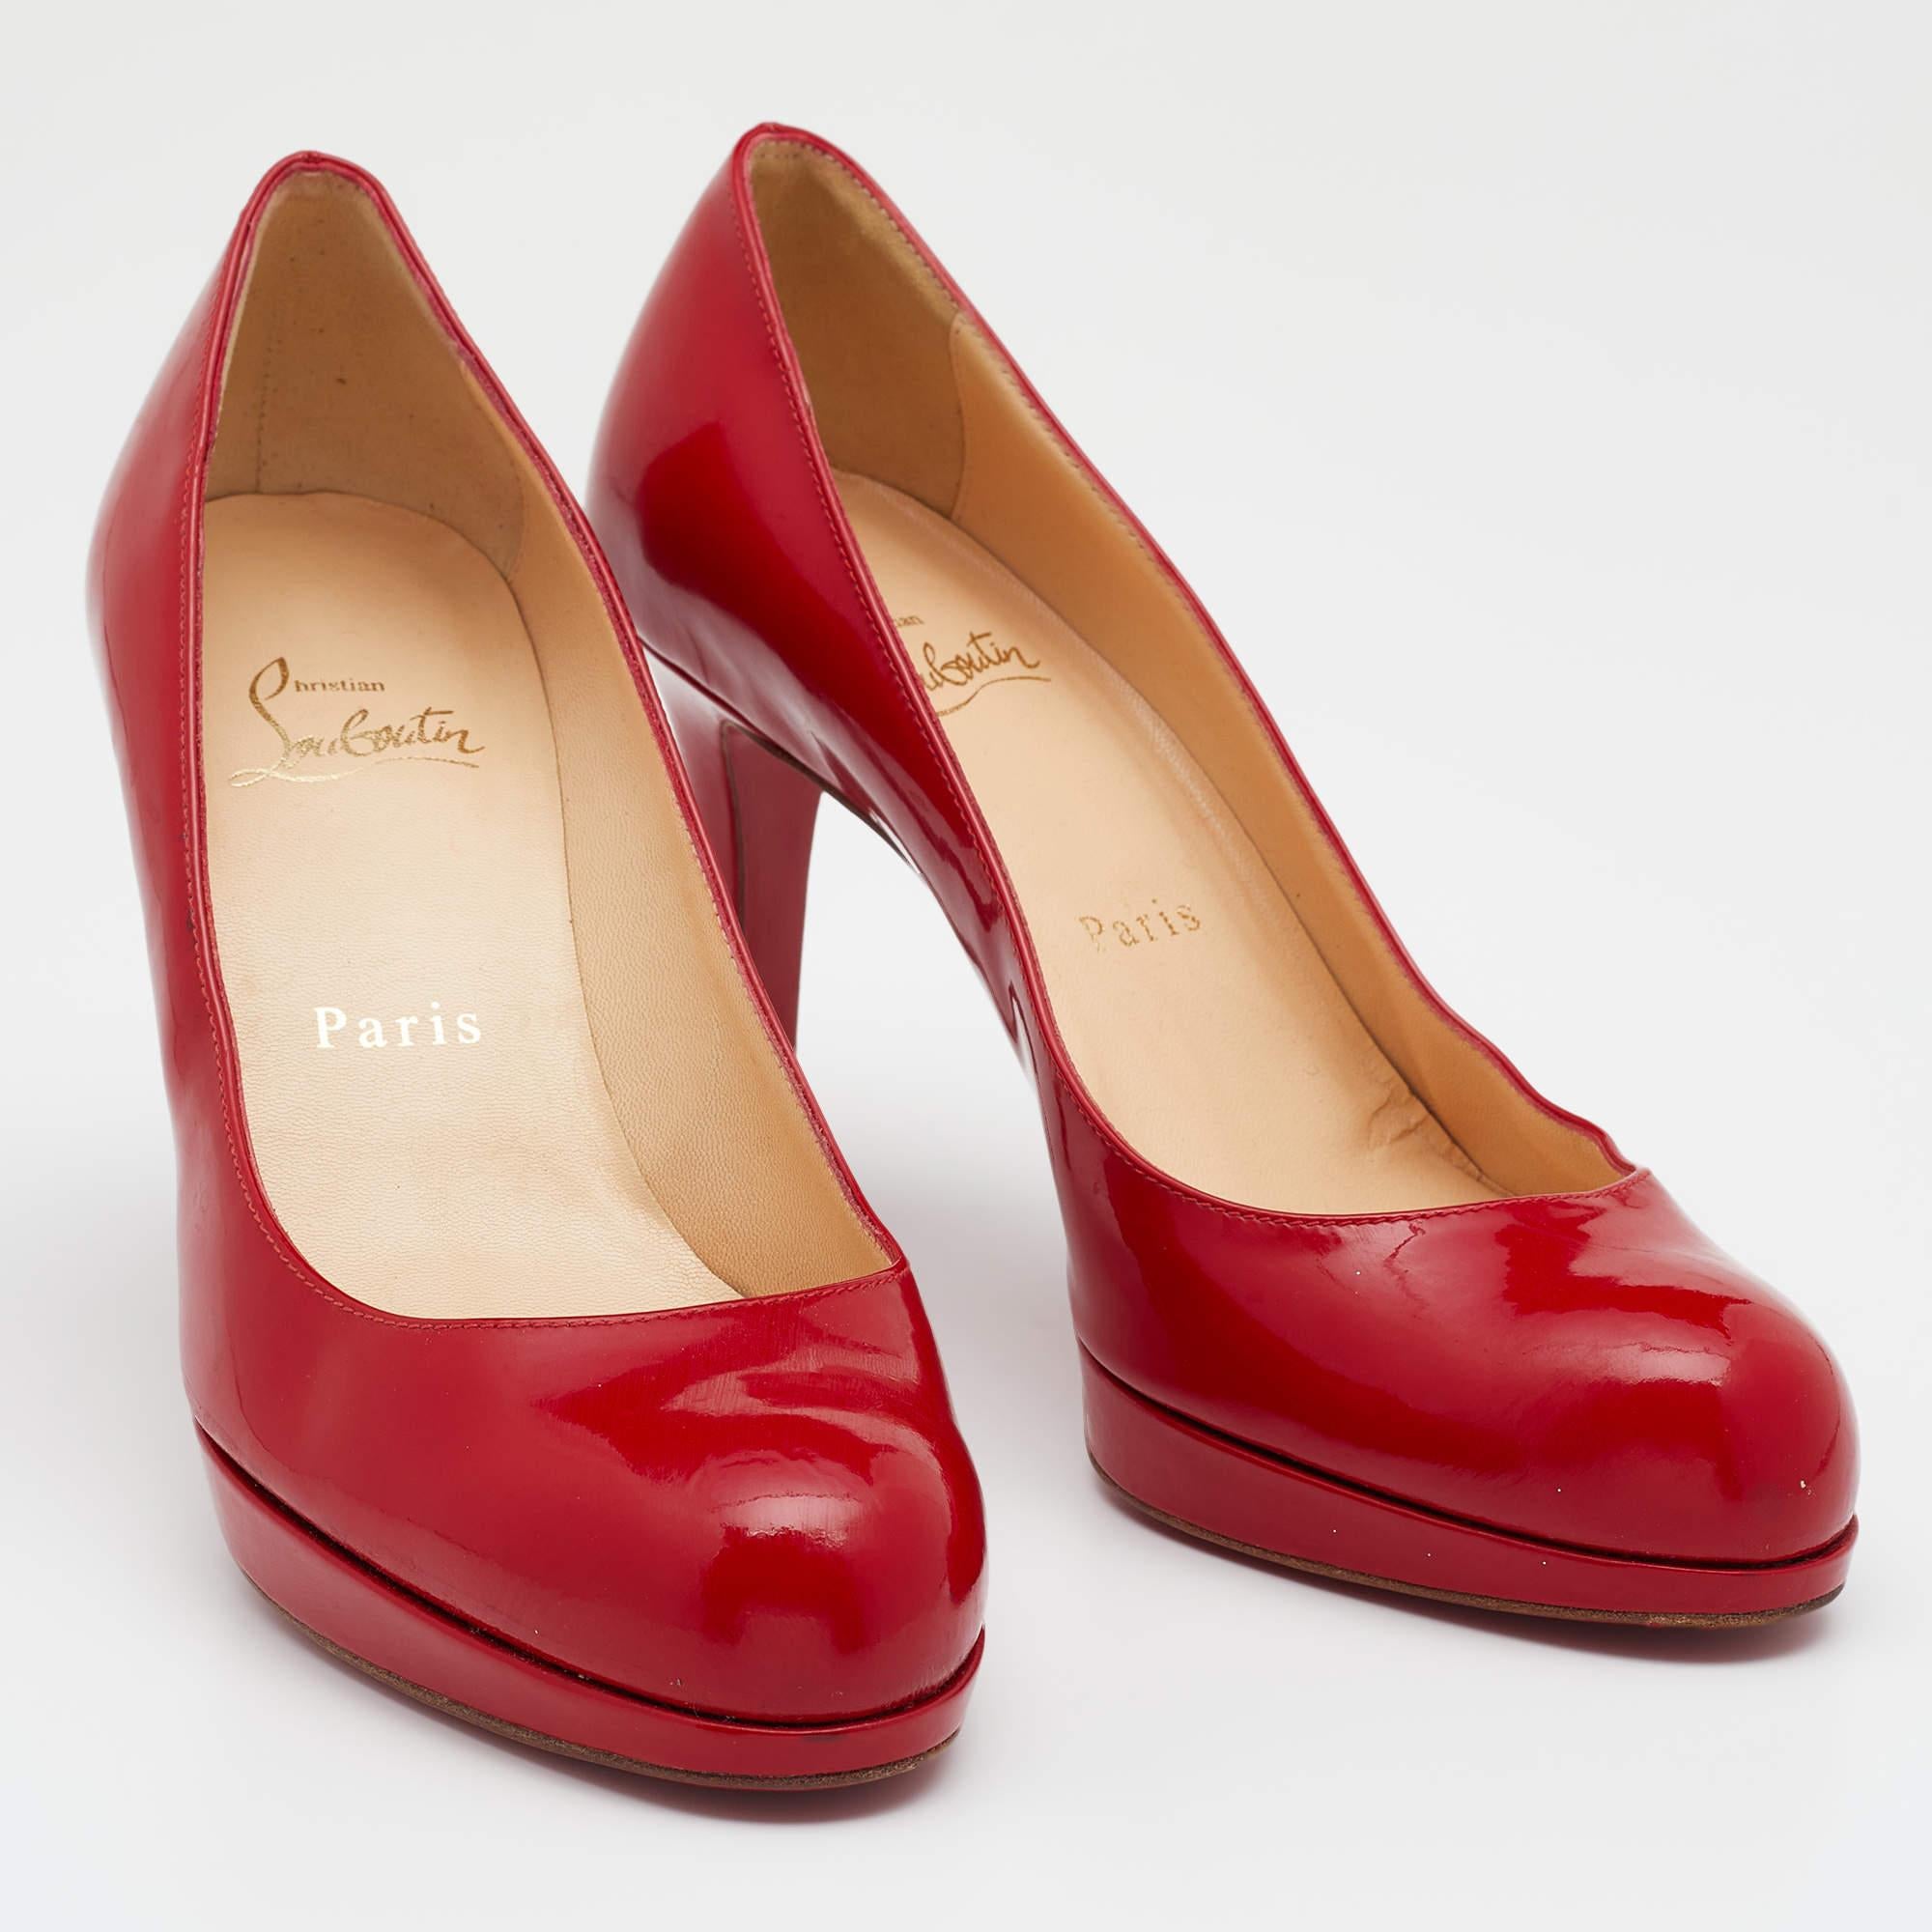 Christian Louboutin Red Patent Leather New Simple Platform Pumps Size 37 For Sale 1